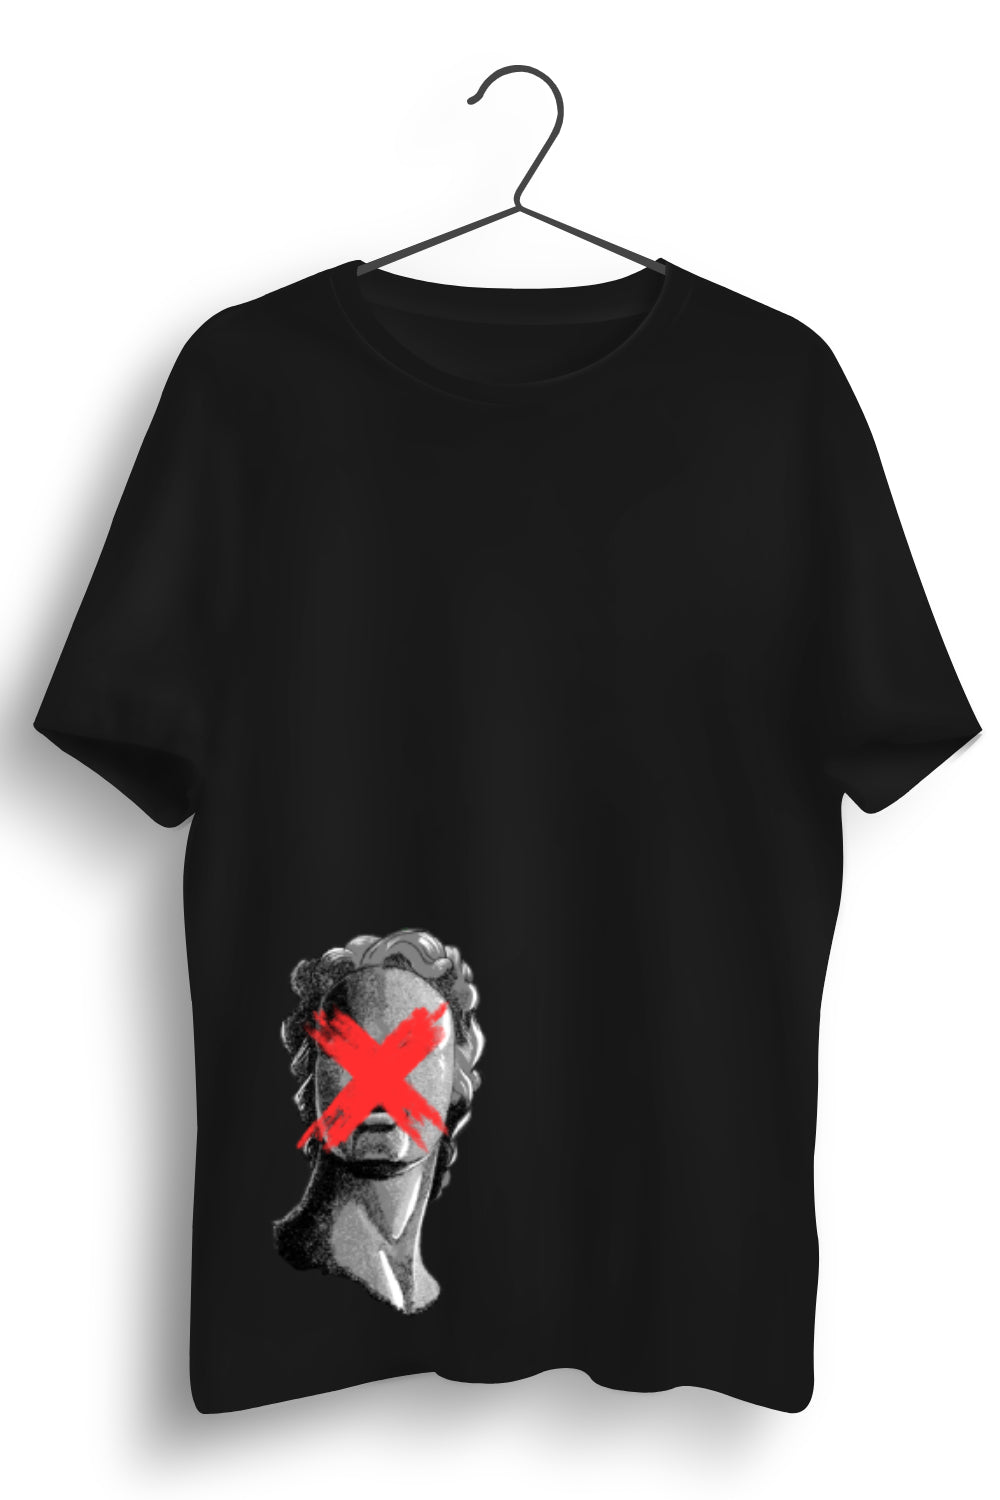 Just Another Head Graphic Printed Black Tshirt